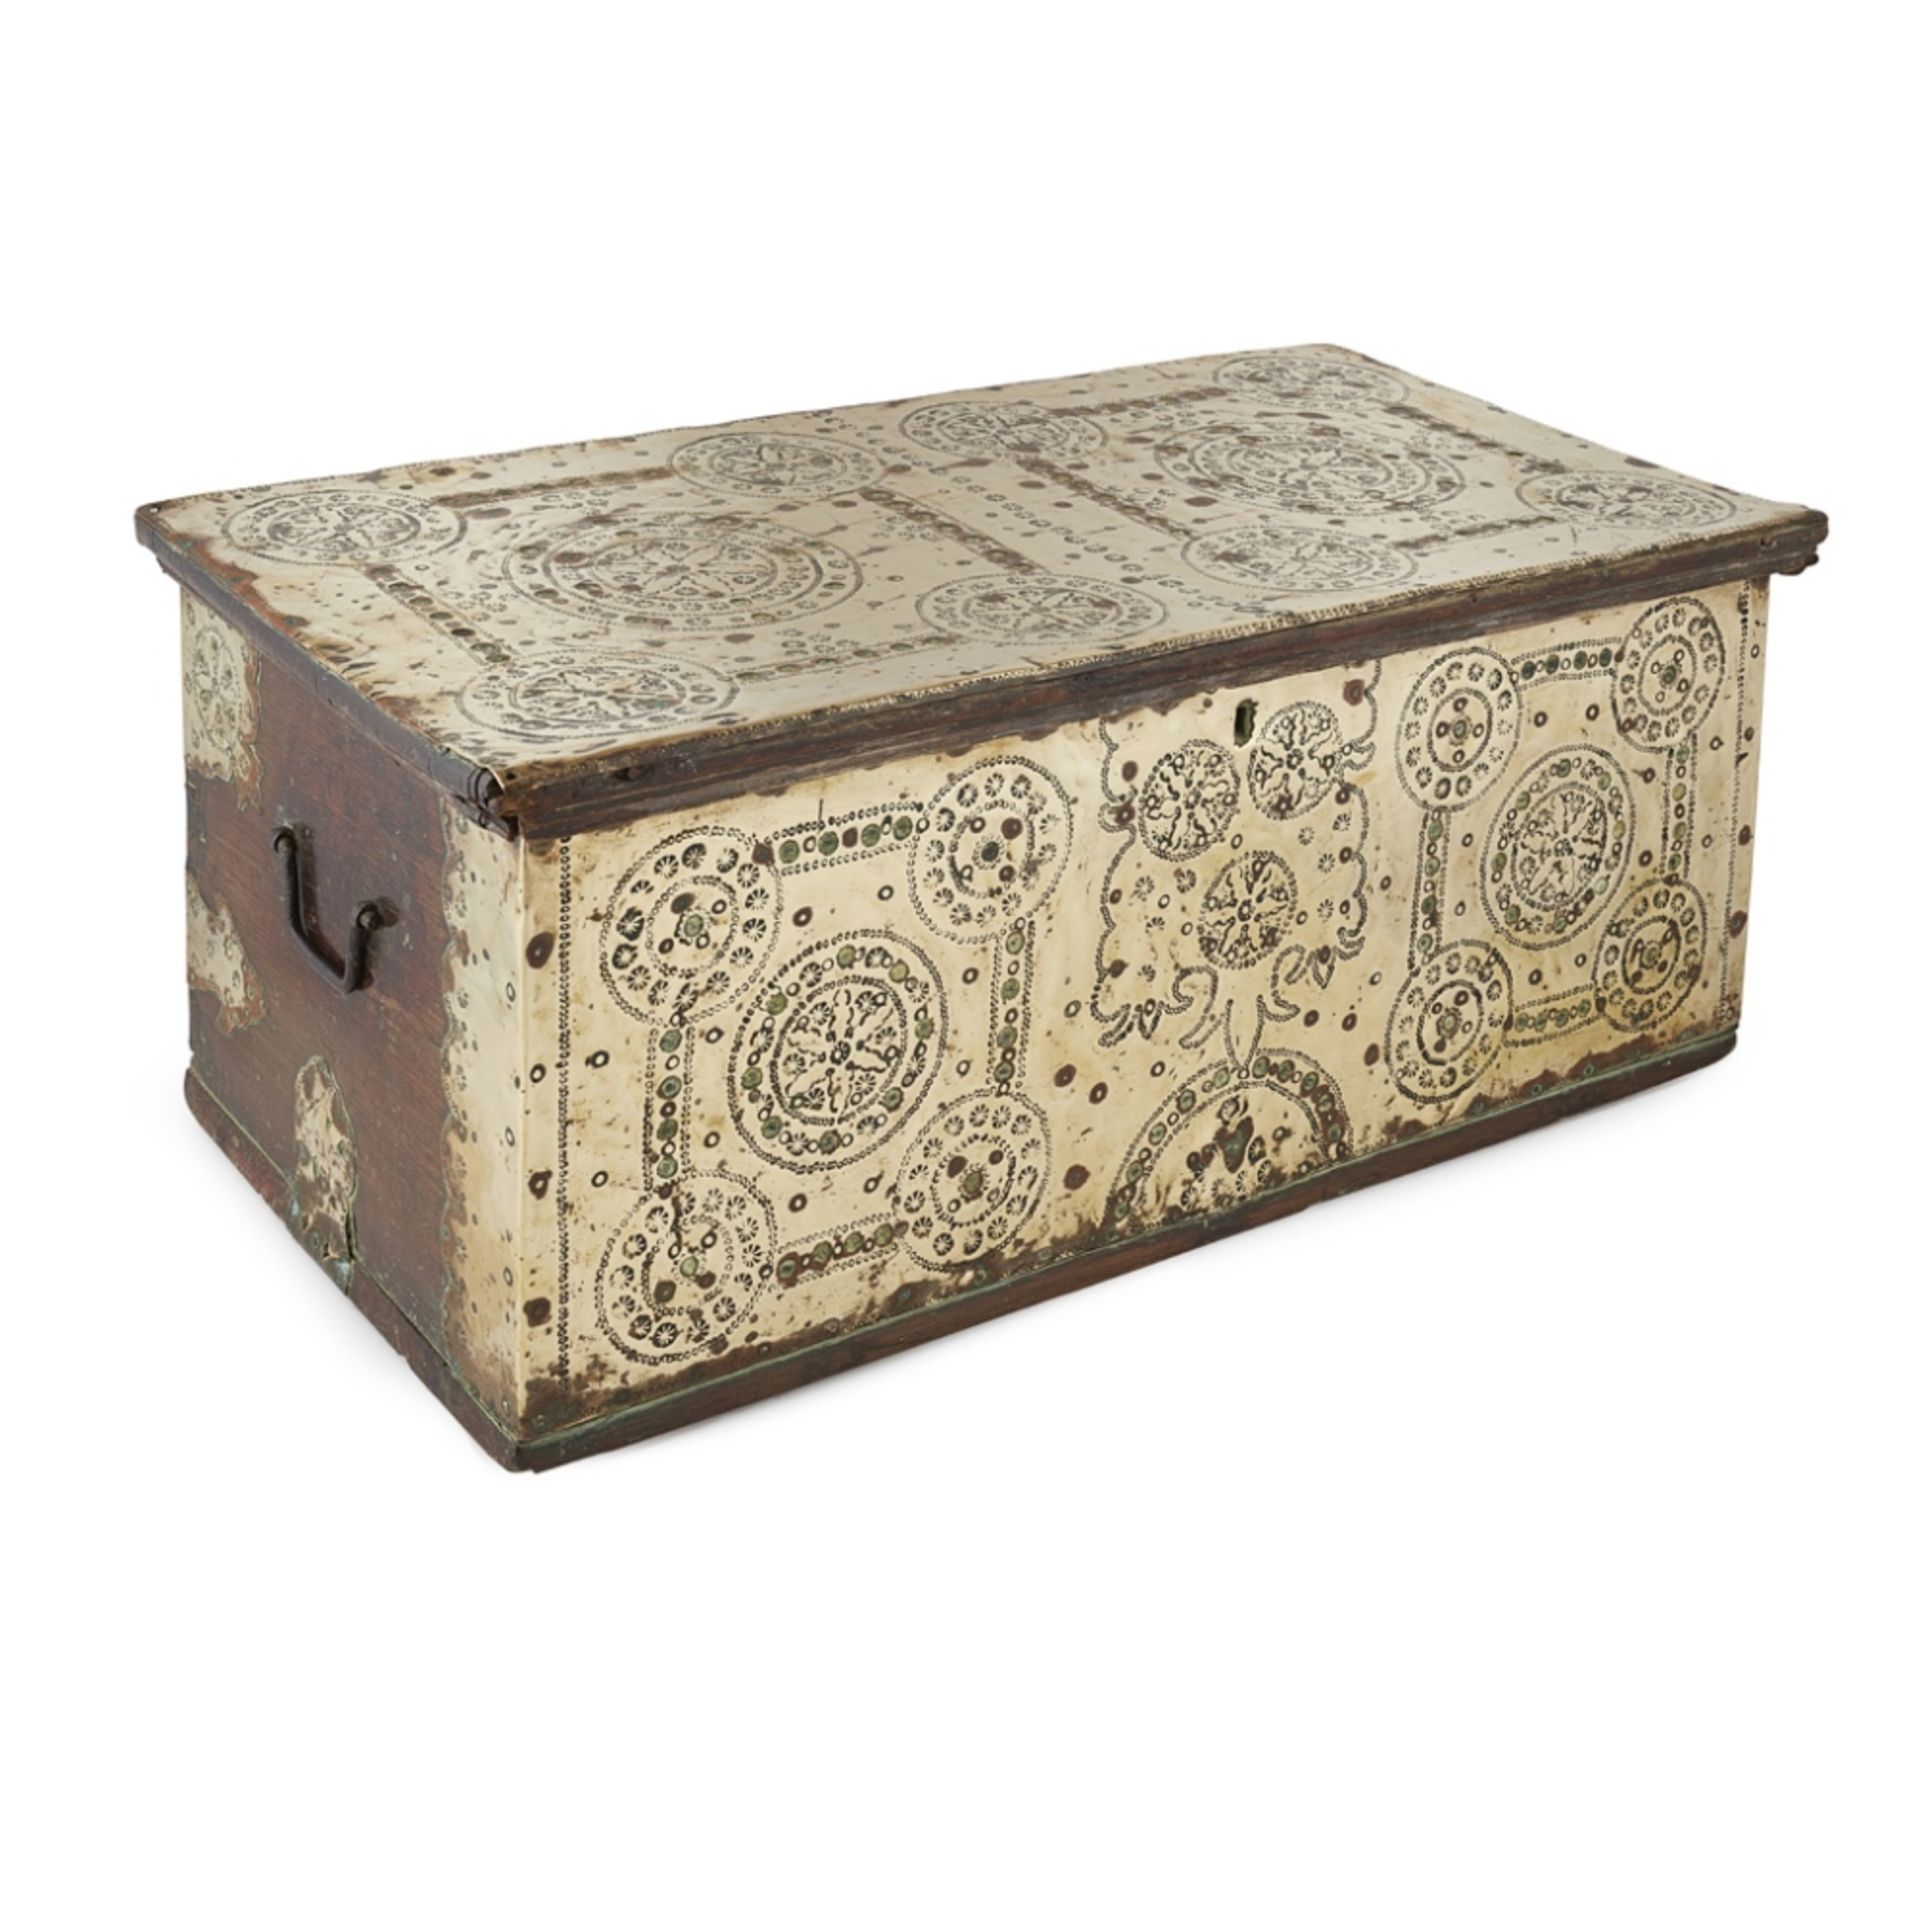 INDIAN BRASS AND PADOUK WORK BOX19TH CENTURY the hinged top and front panel covered in punch